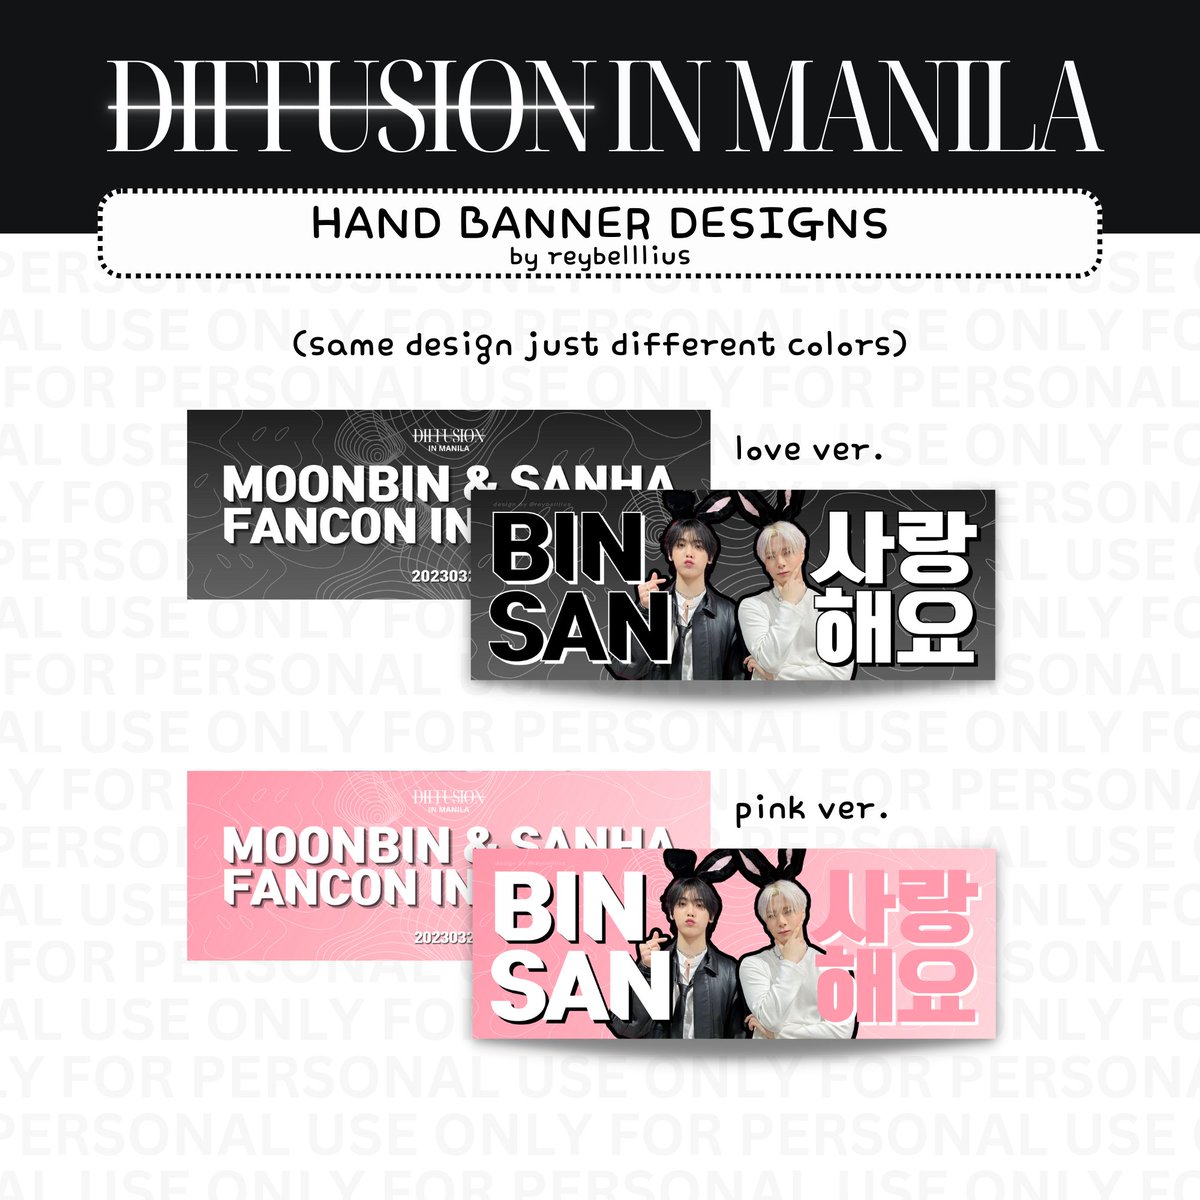 Since we're on the topic of banner designs. Here's a soft copy of the 11x4 freebies I gave out last fancon. If 'di ka nakakuha noon, here ya go! This serves as remembrance rin of our very first sub-unit. Print it yourself na lang.

bit.ly/jjangbinsan

#DIFFUSIONinMNL #ASTRO